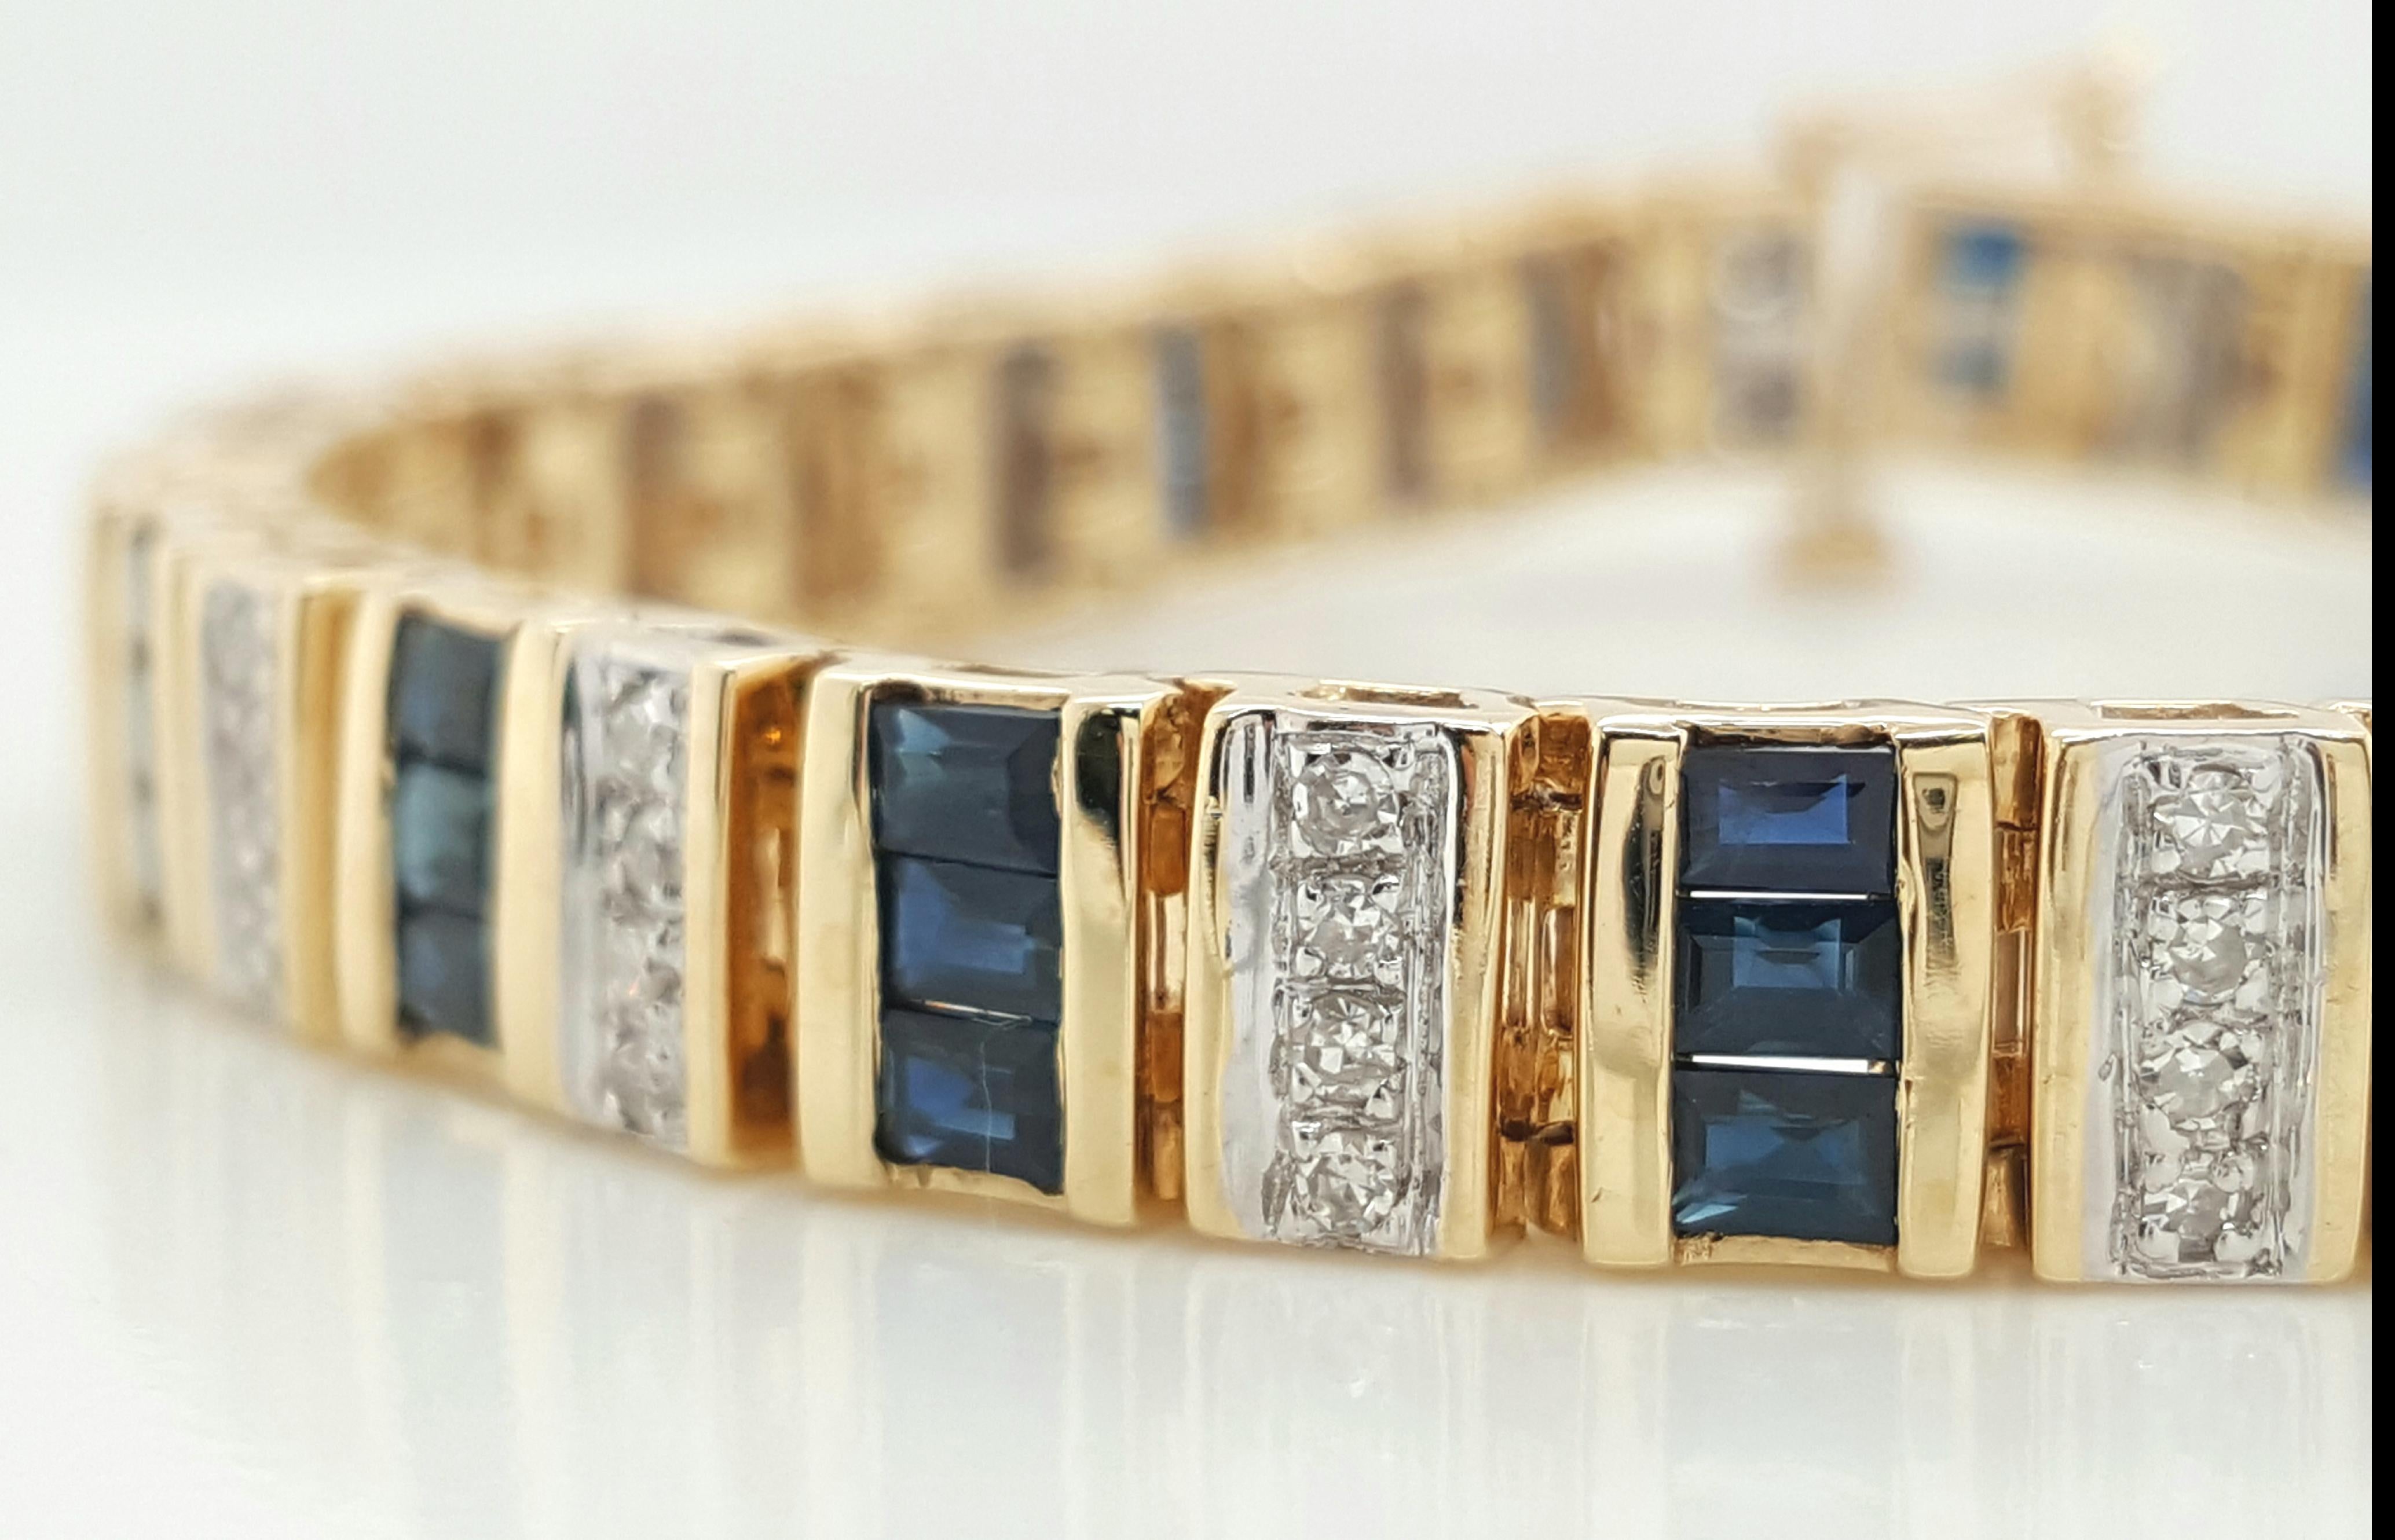 This incredible tennis bracelet is an absolute beauty. It is flowing with 1.5 carats of baguette natural bright blue sapphires alternating with 0.75 ct round brilliant diamonds in-between. The bracelet is made of 14 karat yellow gold and sits on the